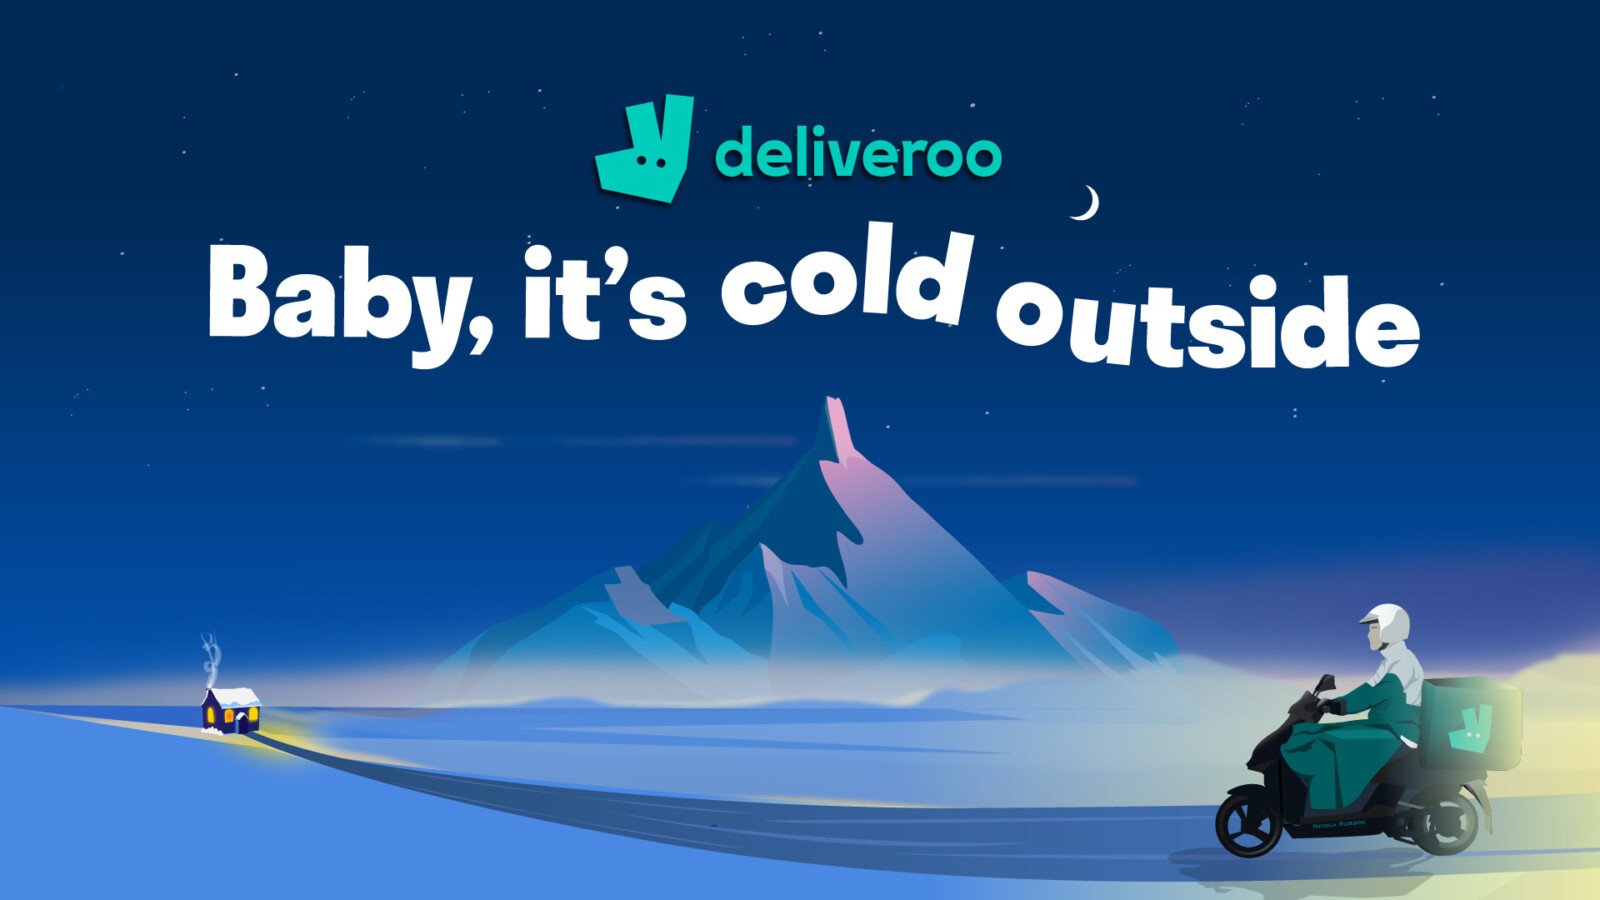 Deliveroo – personal project combining advertising and vector illustration